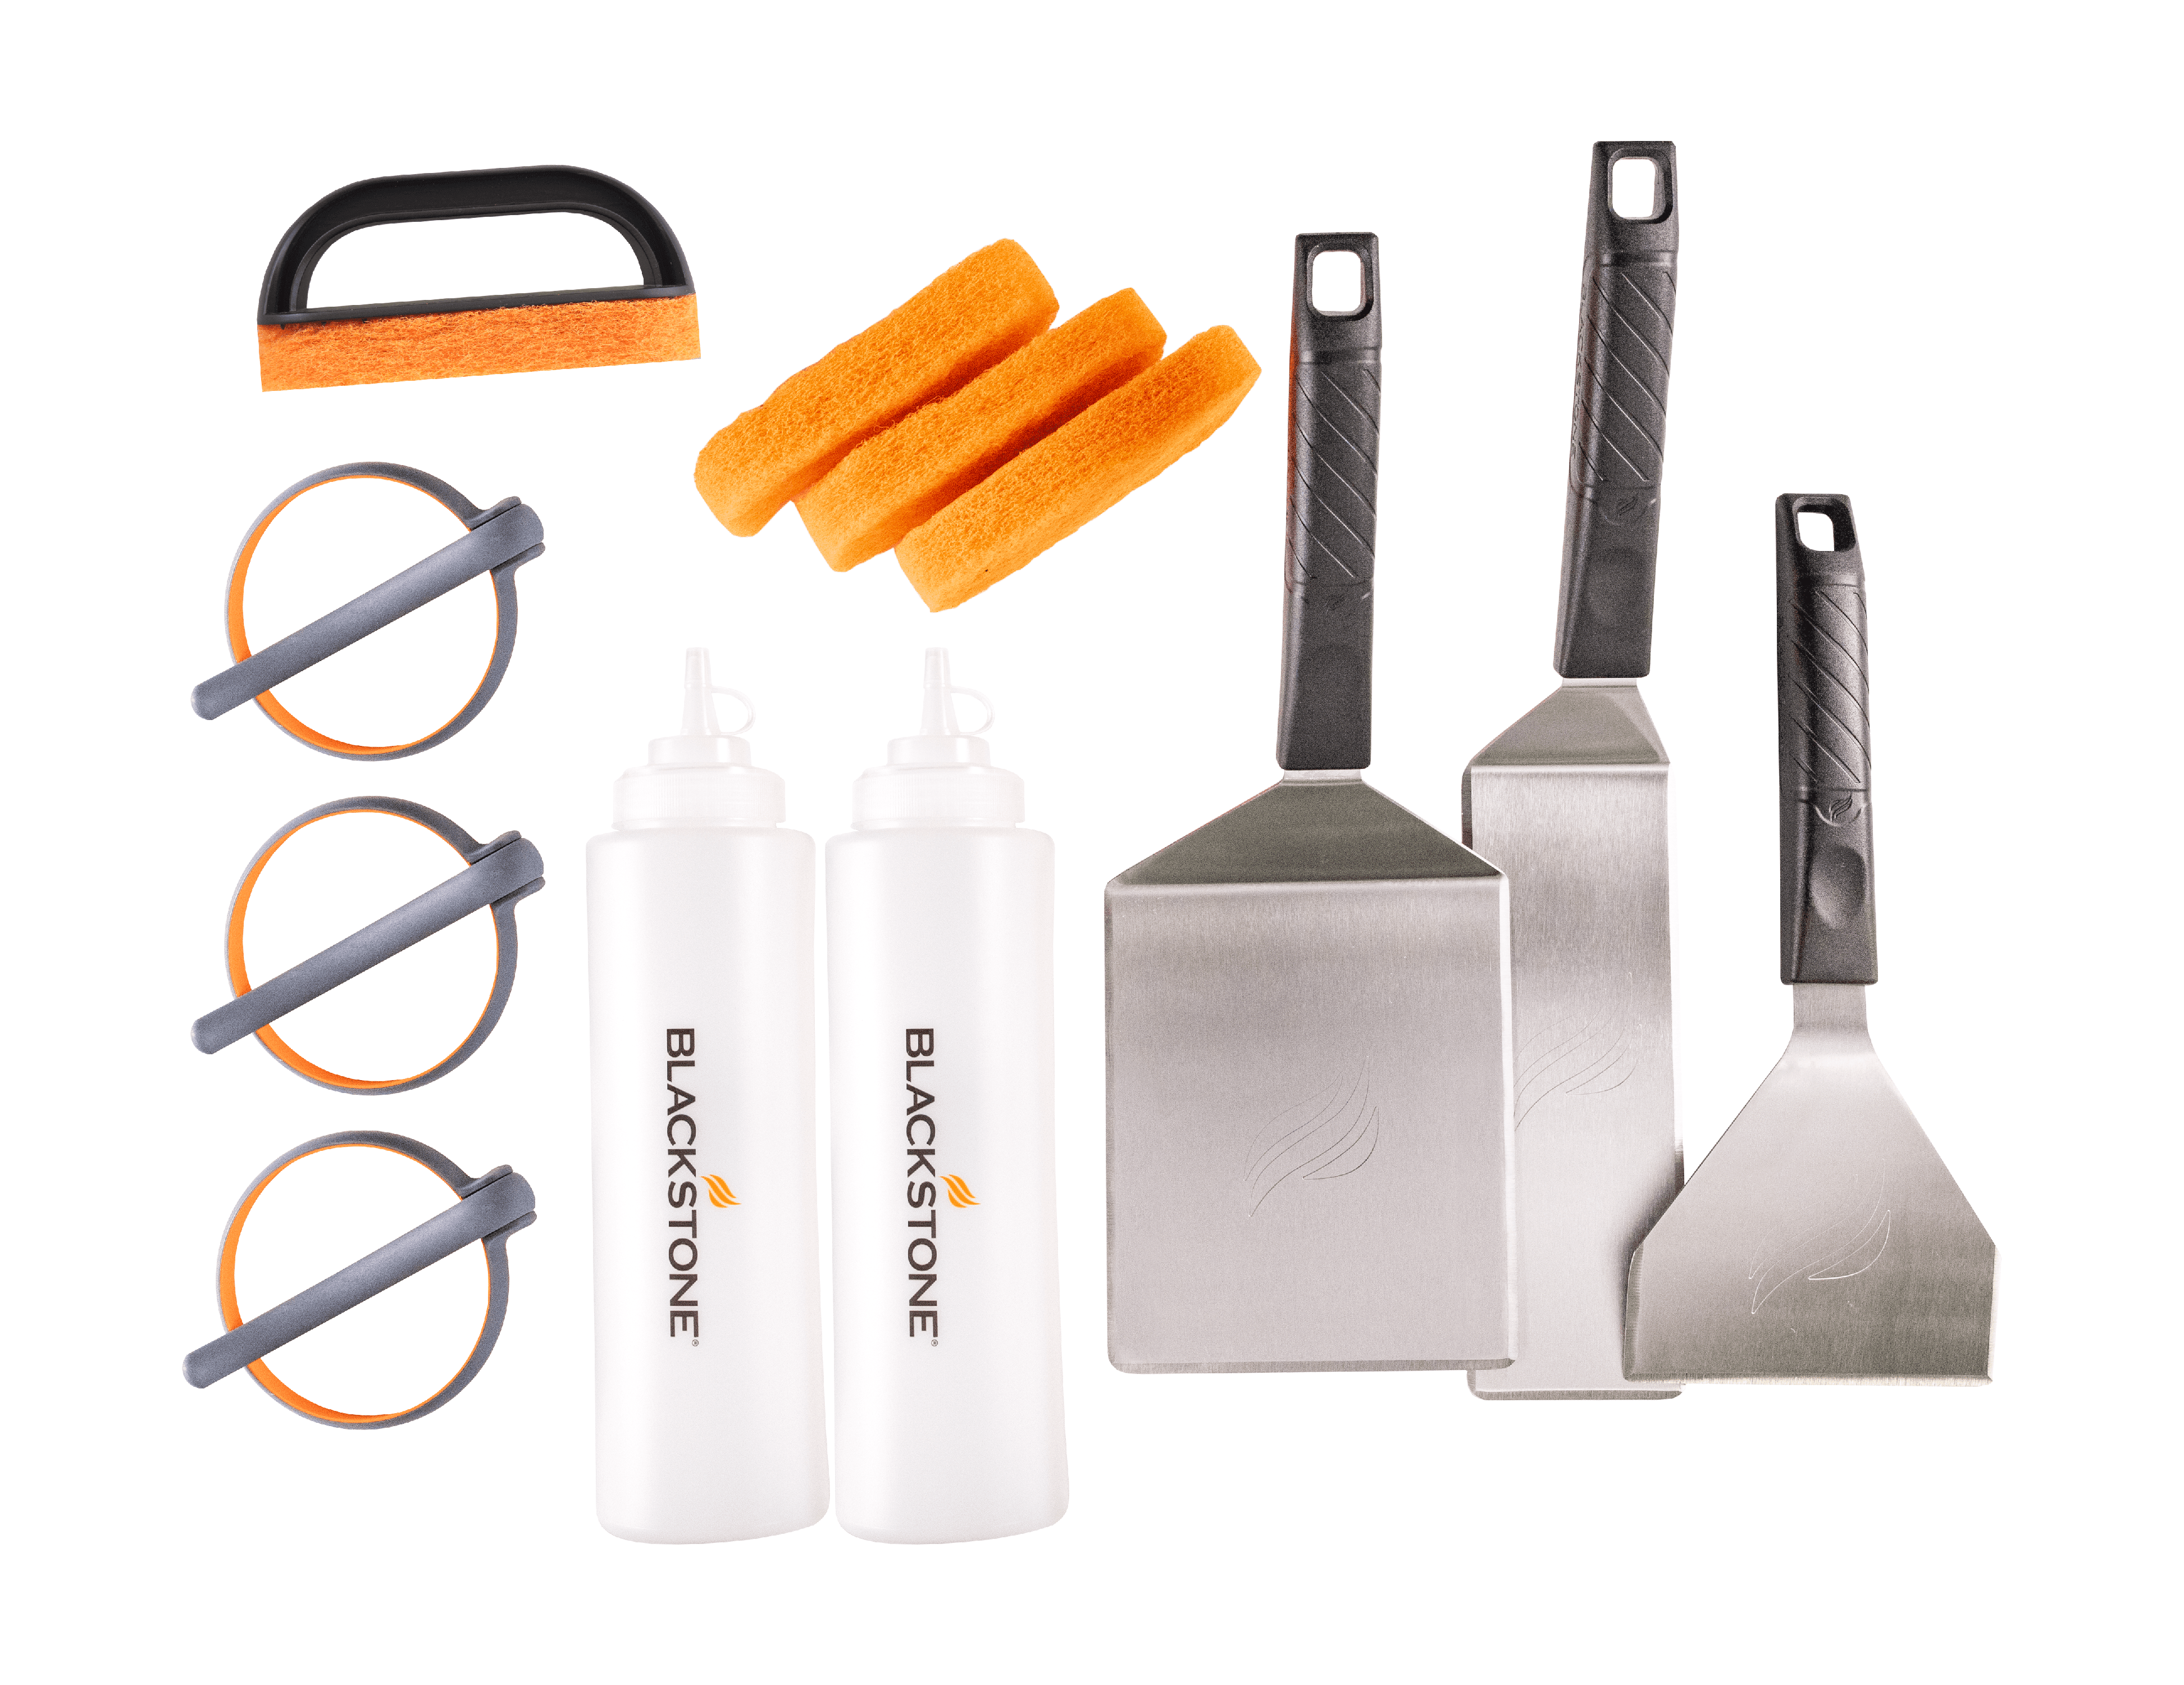 Muzzai- Stainless Steel Teppanyaki Blackstone Accessories /& BBQ Tools Set Blackstone Griddle Accessories,13 Pieces Flat Top Grill Accessories,for Outdoor Camping Griddle Accessories Kit